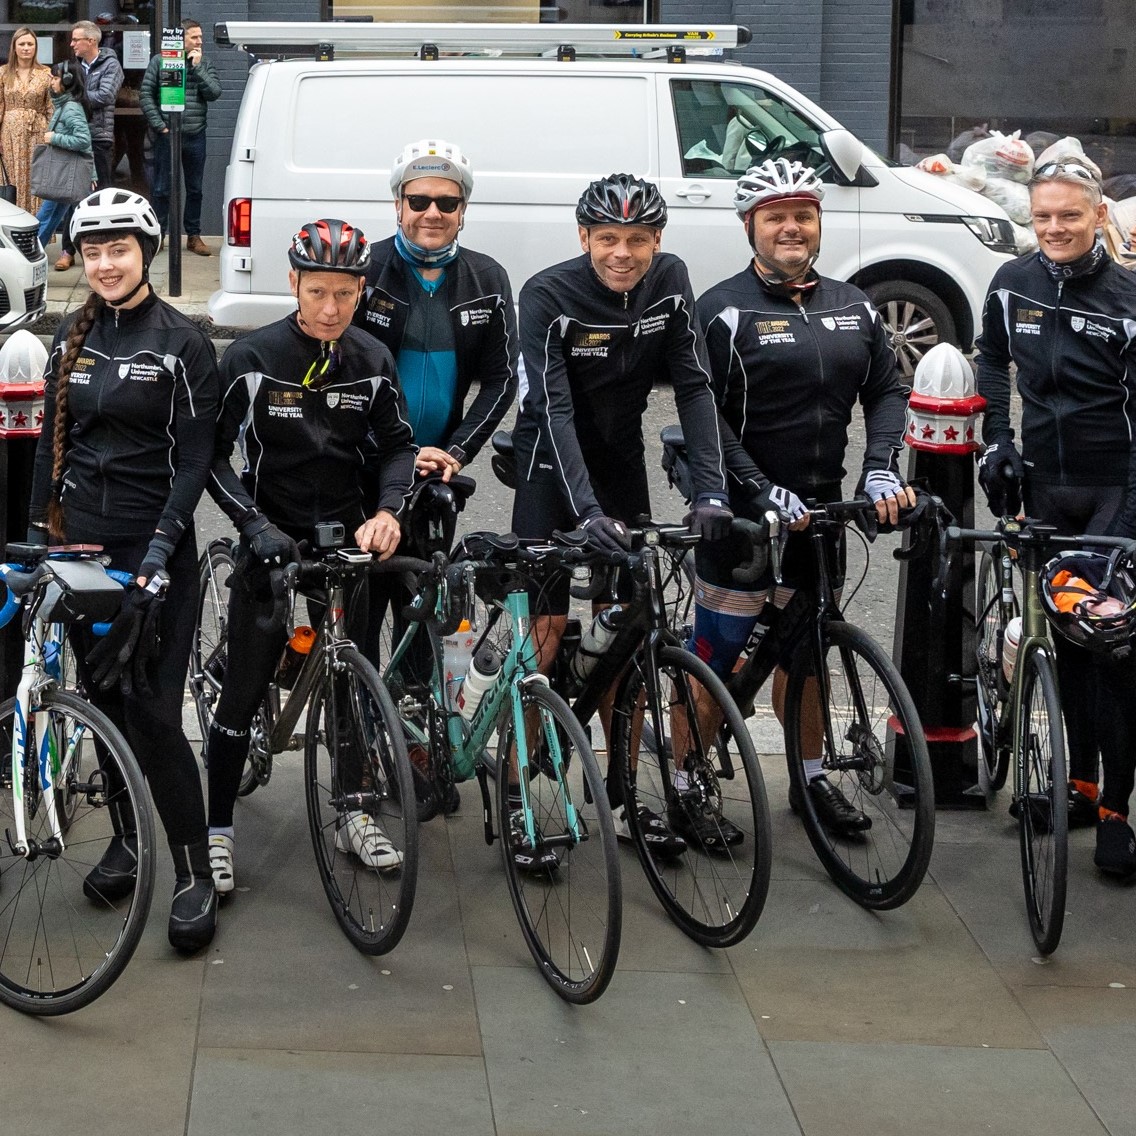 Cyclists for HEWB at London Campus